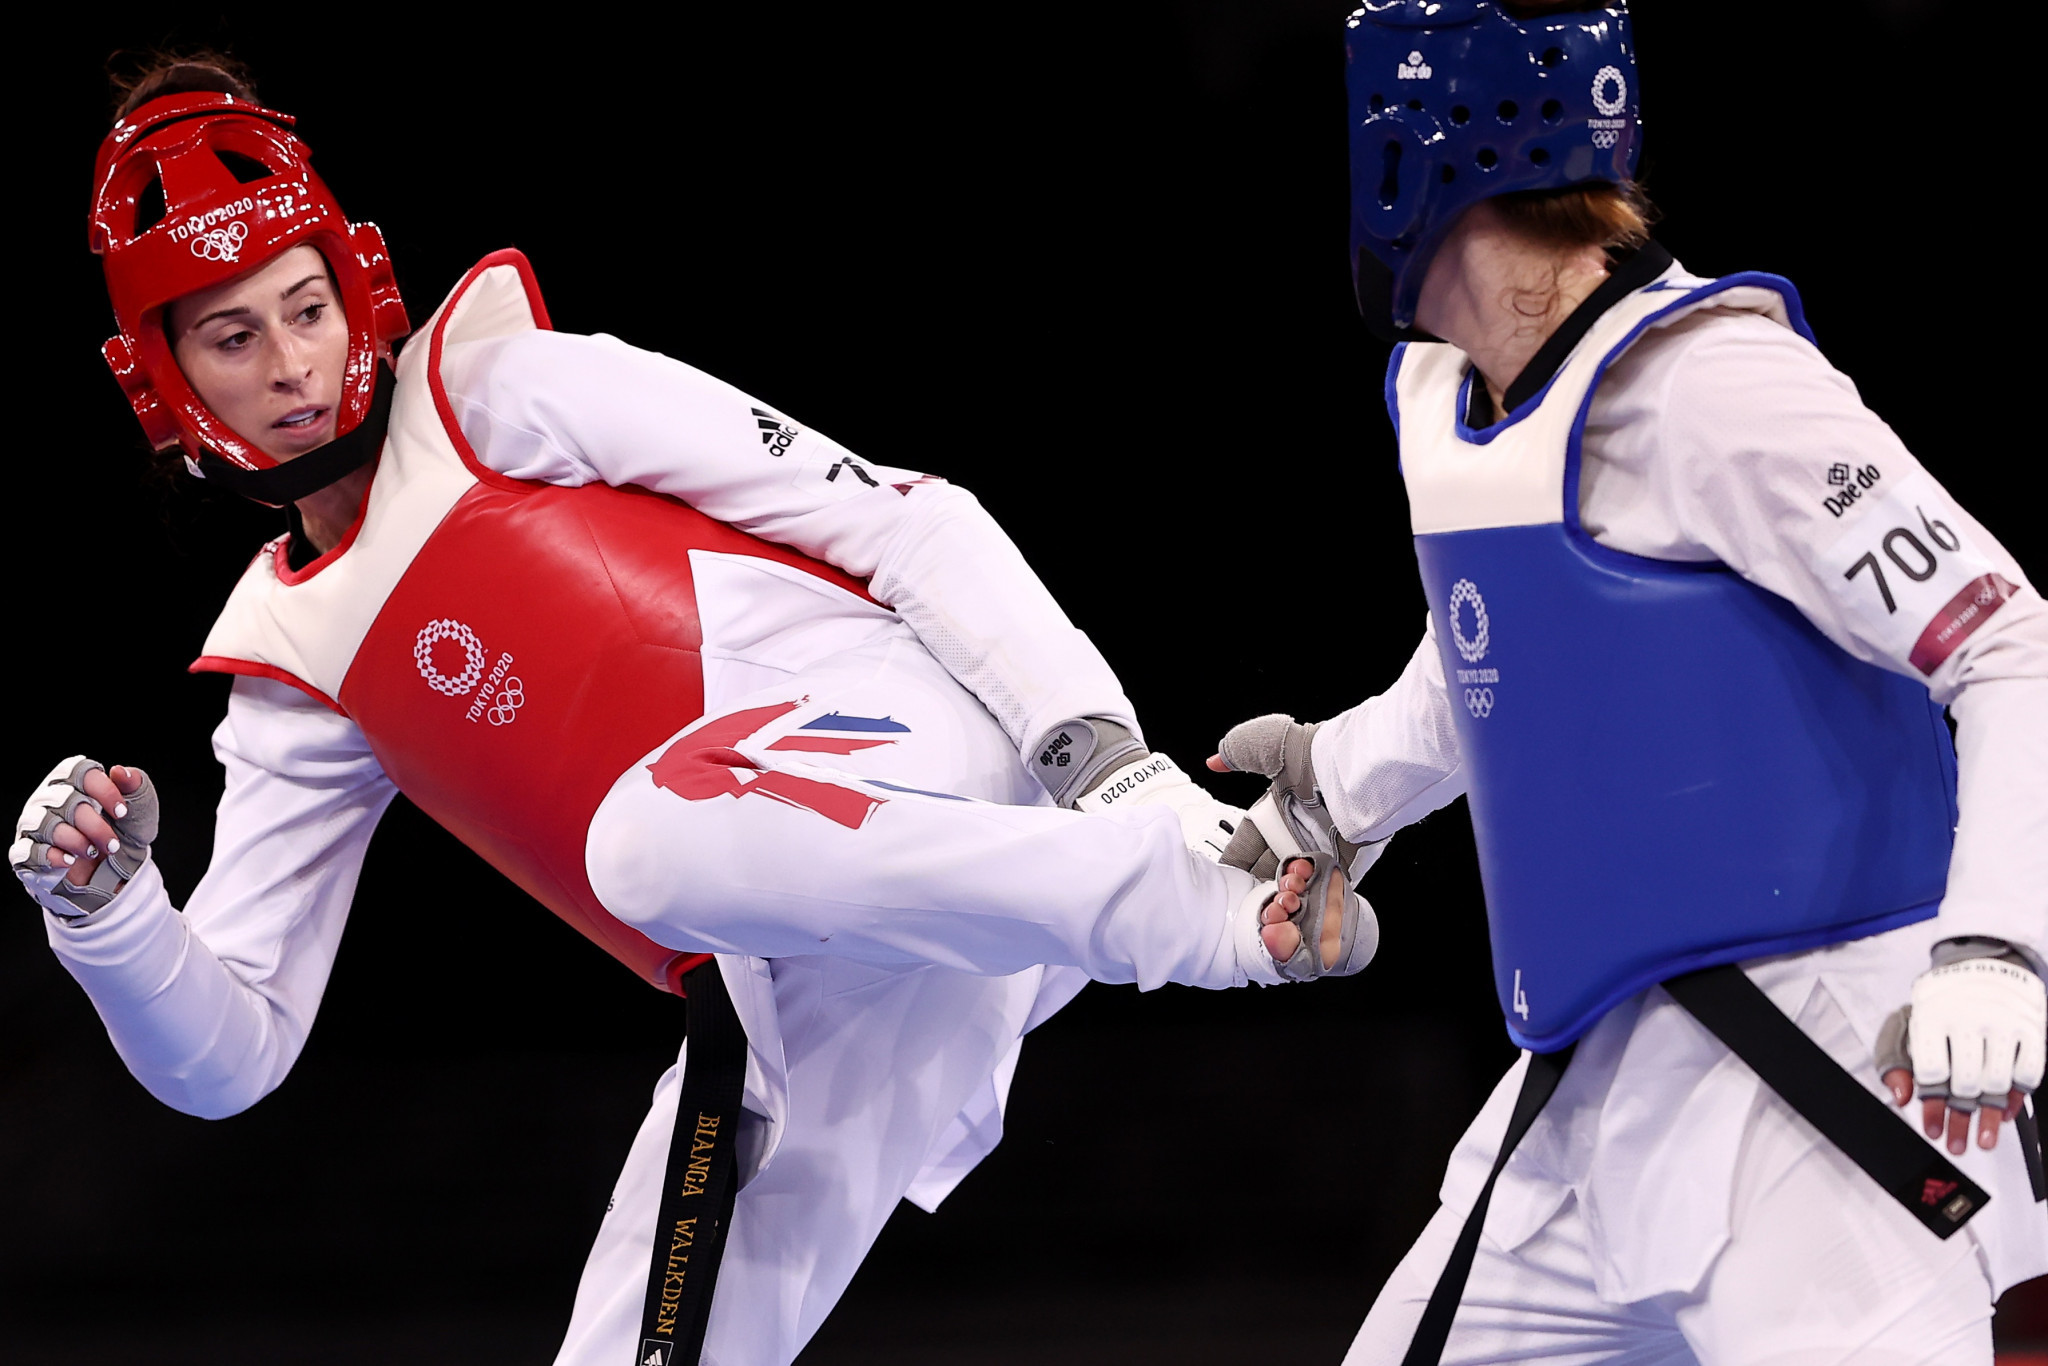 Britain's Bianca Walkden dashed Russia's hopes of another gold medal with victory over Kristina Adebaio in the over-73kg final ©Getty Images